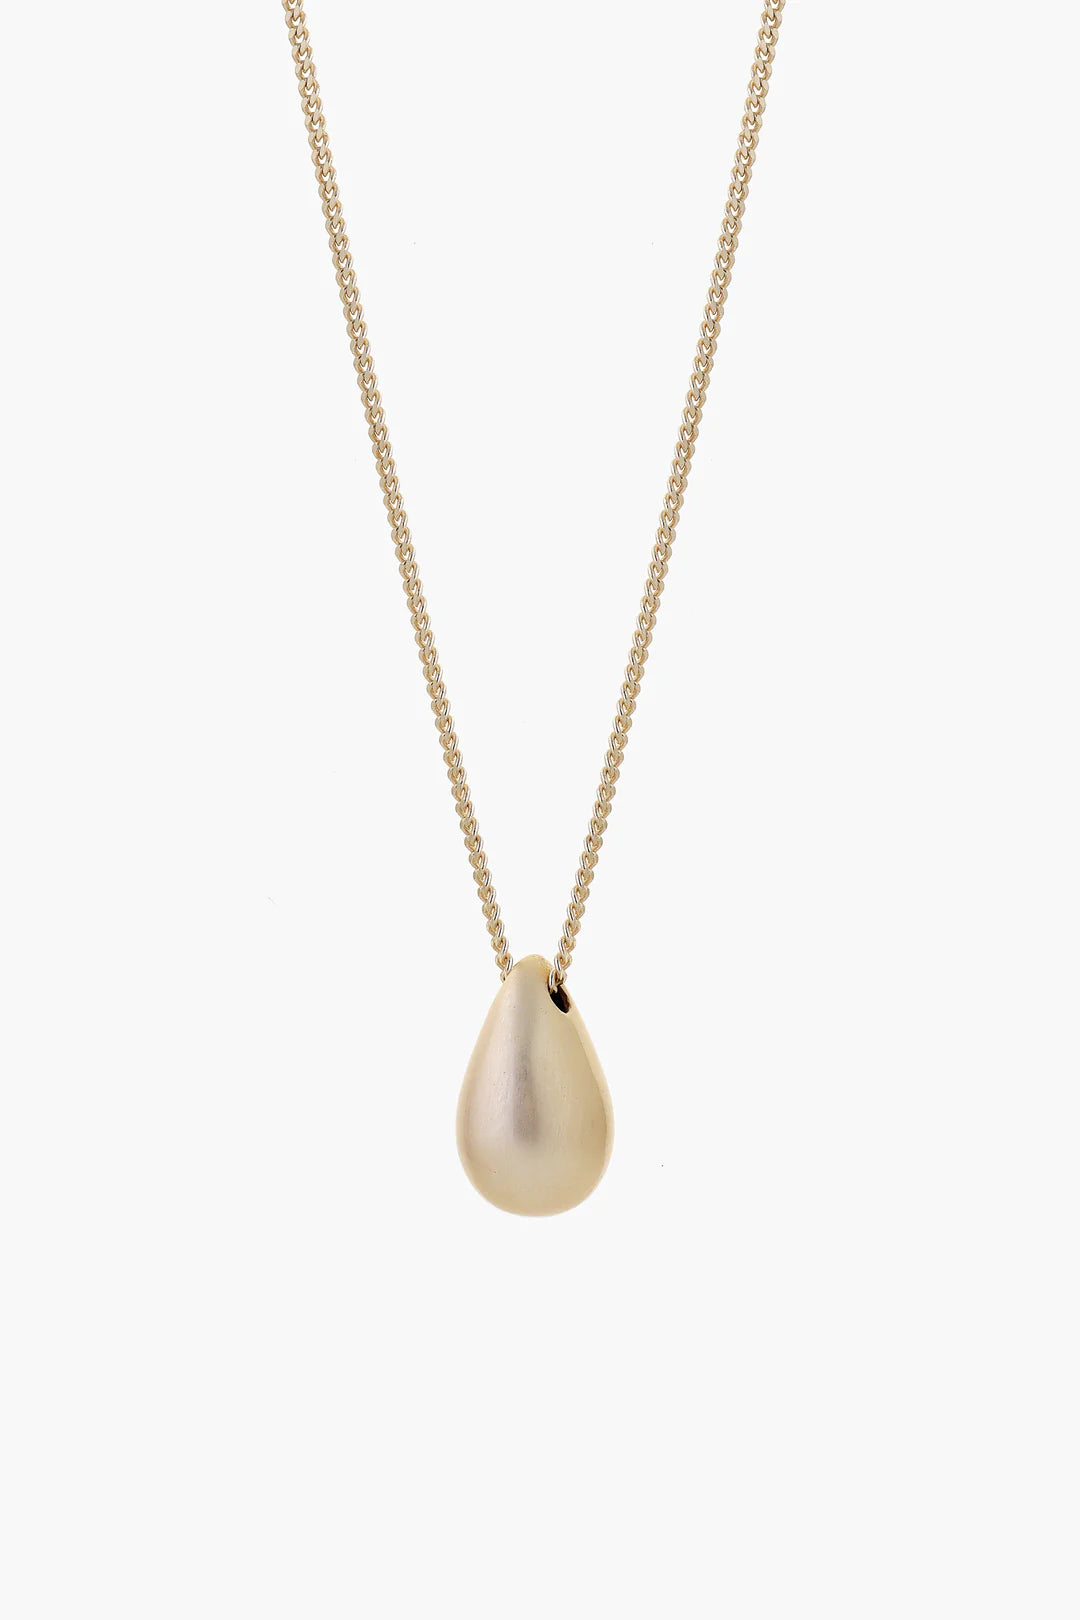 HUSH GOLD NECKLACE